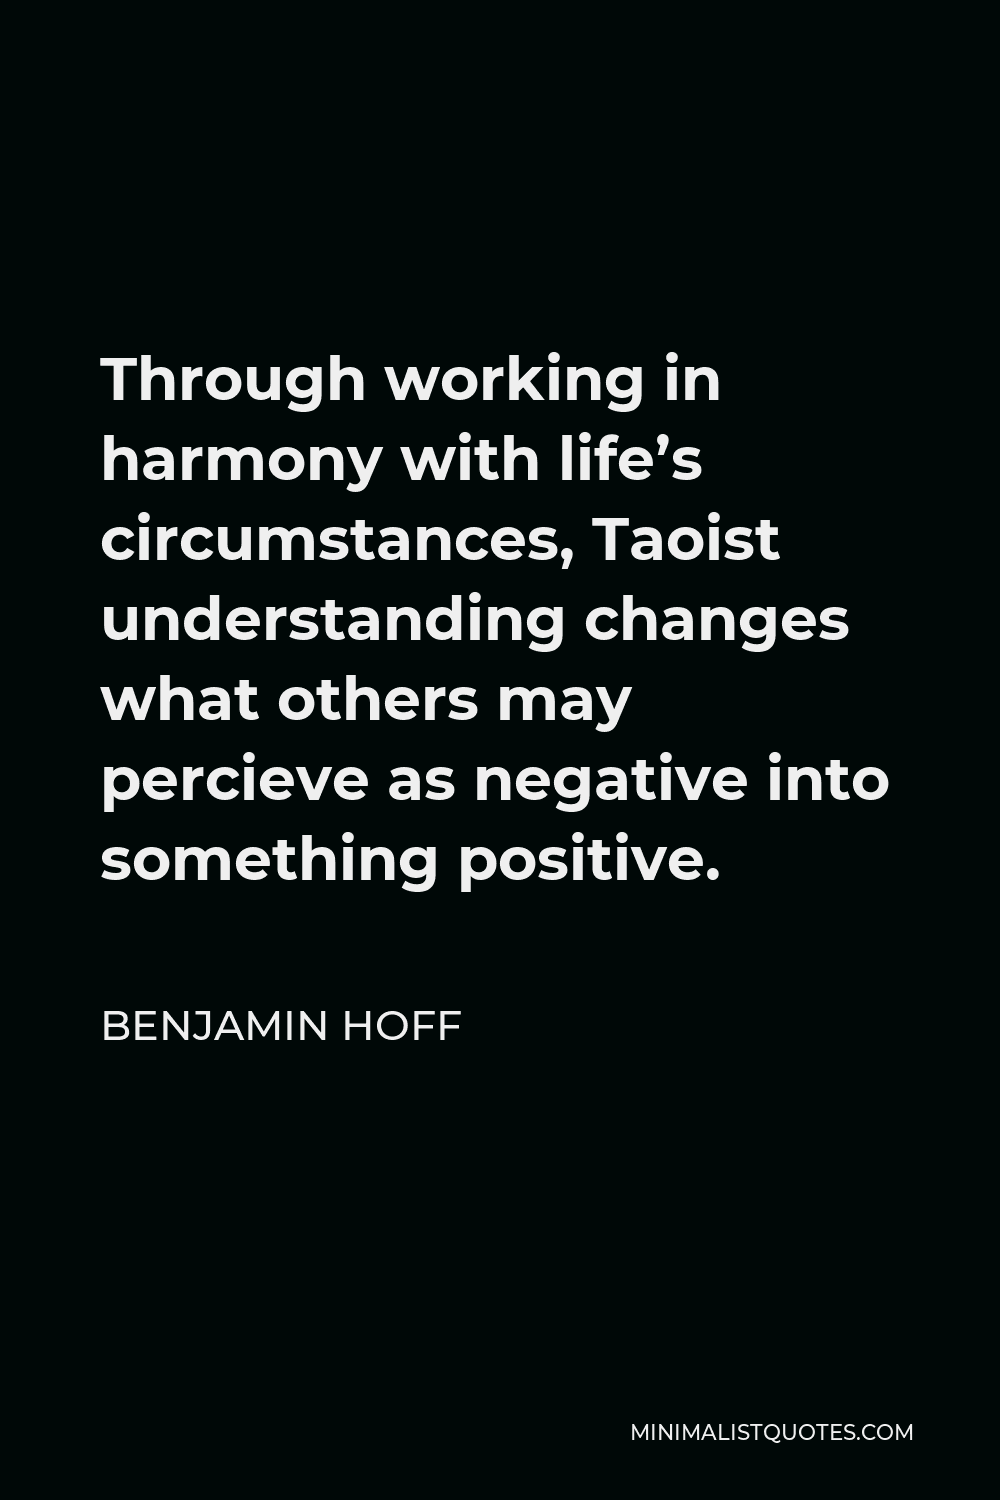 Benjamin Hoff Quote - Through working in harmony with life’s circumstances, Taoist understanding changes what others may percieve as negative into something positive.